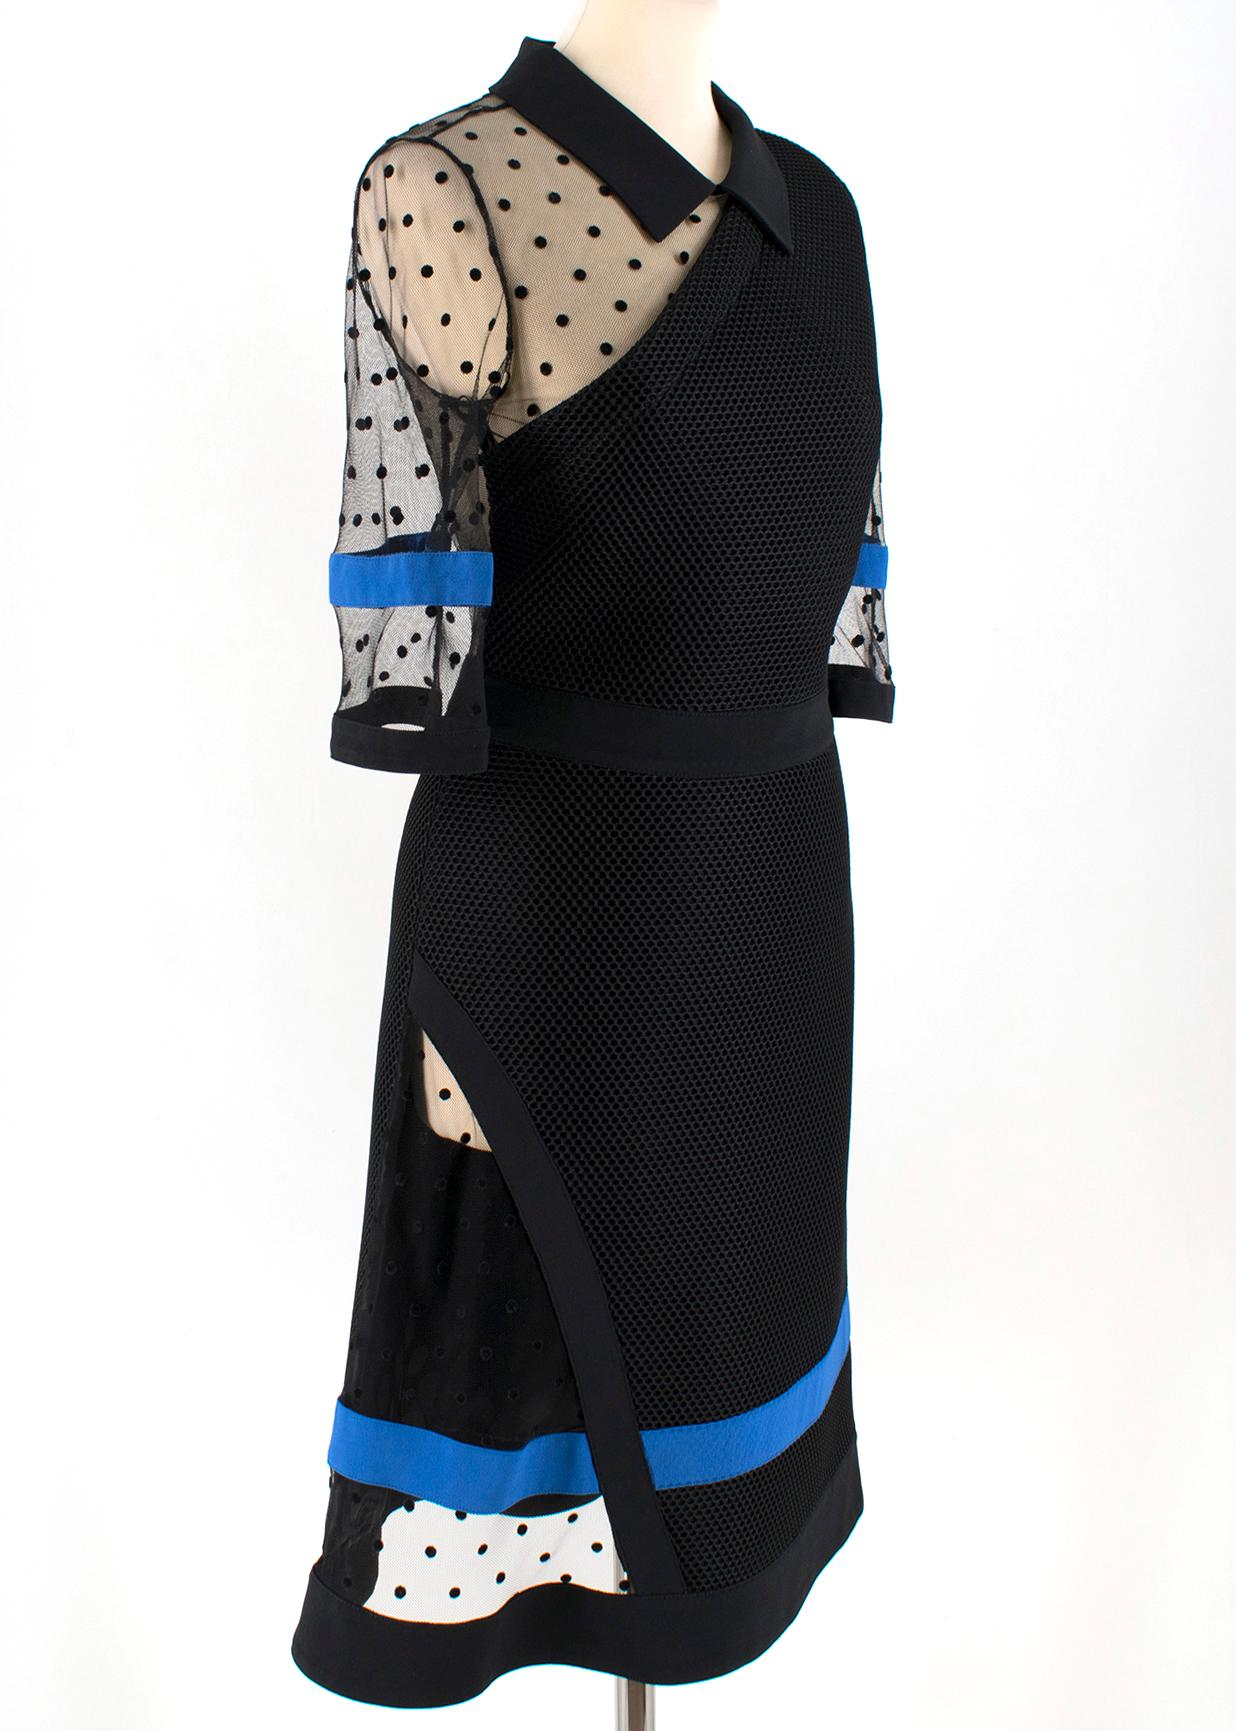 Emanuel Ungaro Black Neoprene Tulle Panelled Dress
- black mesh neoprene dress
- blue stripes to the sleeve and bottom 
- asymmetric mesh inserts to the sleeve, back and bottom 
- round collar
- zip fastening to the back, lined

Please note, these